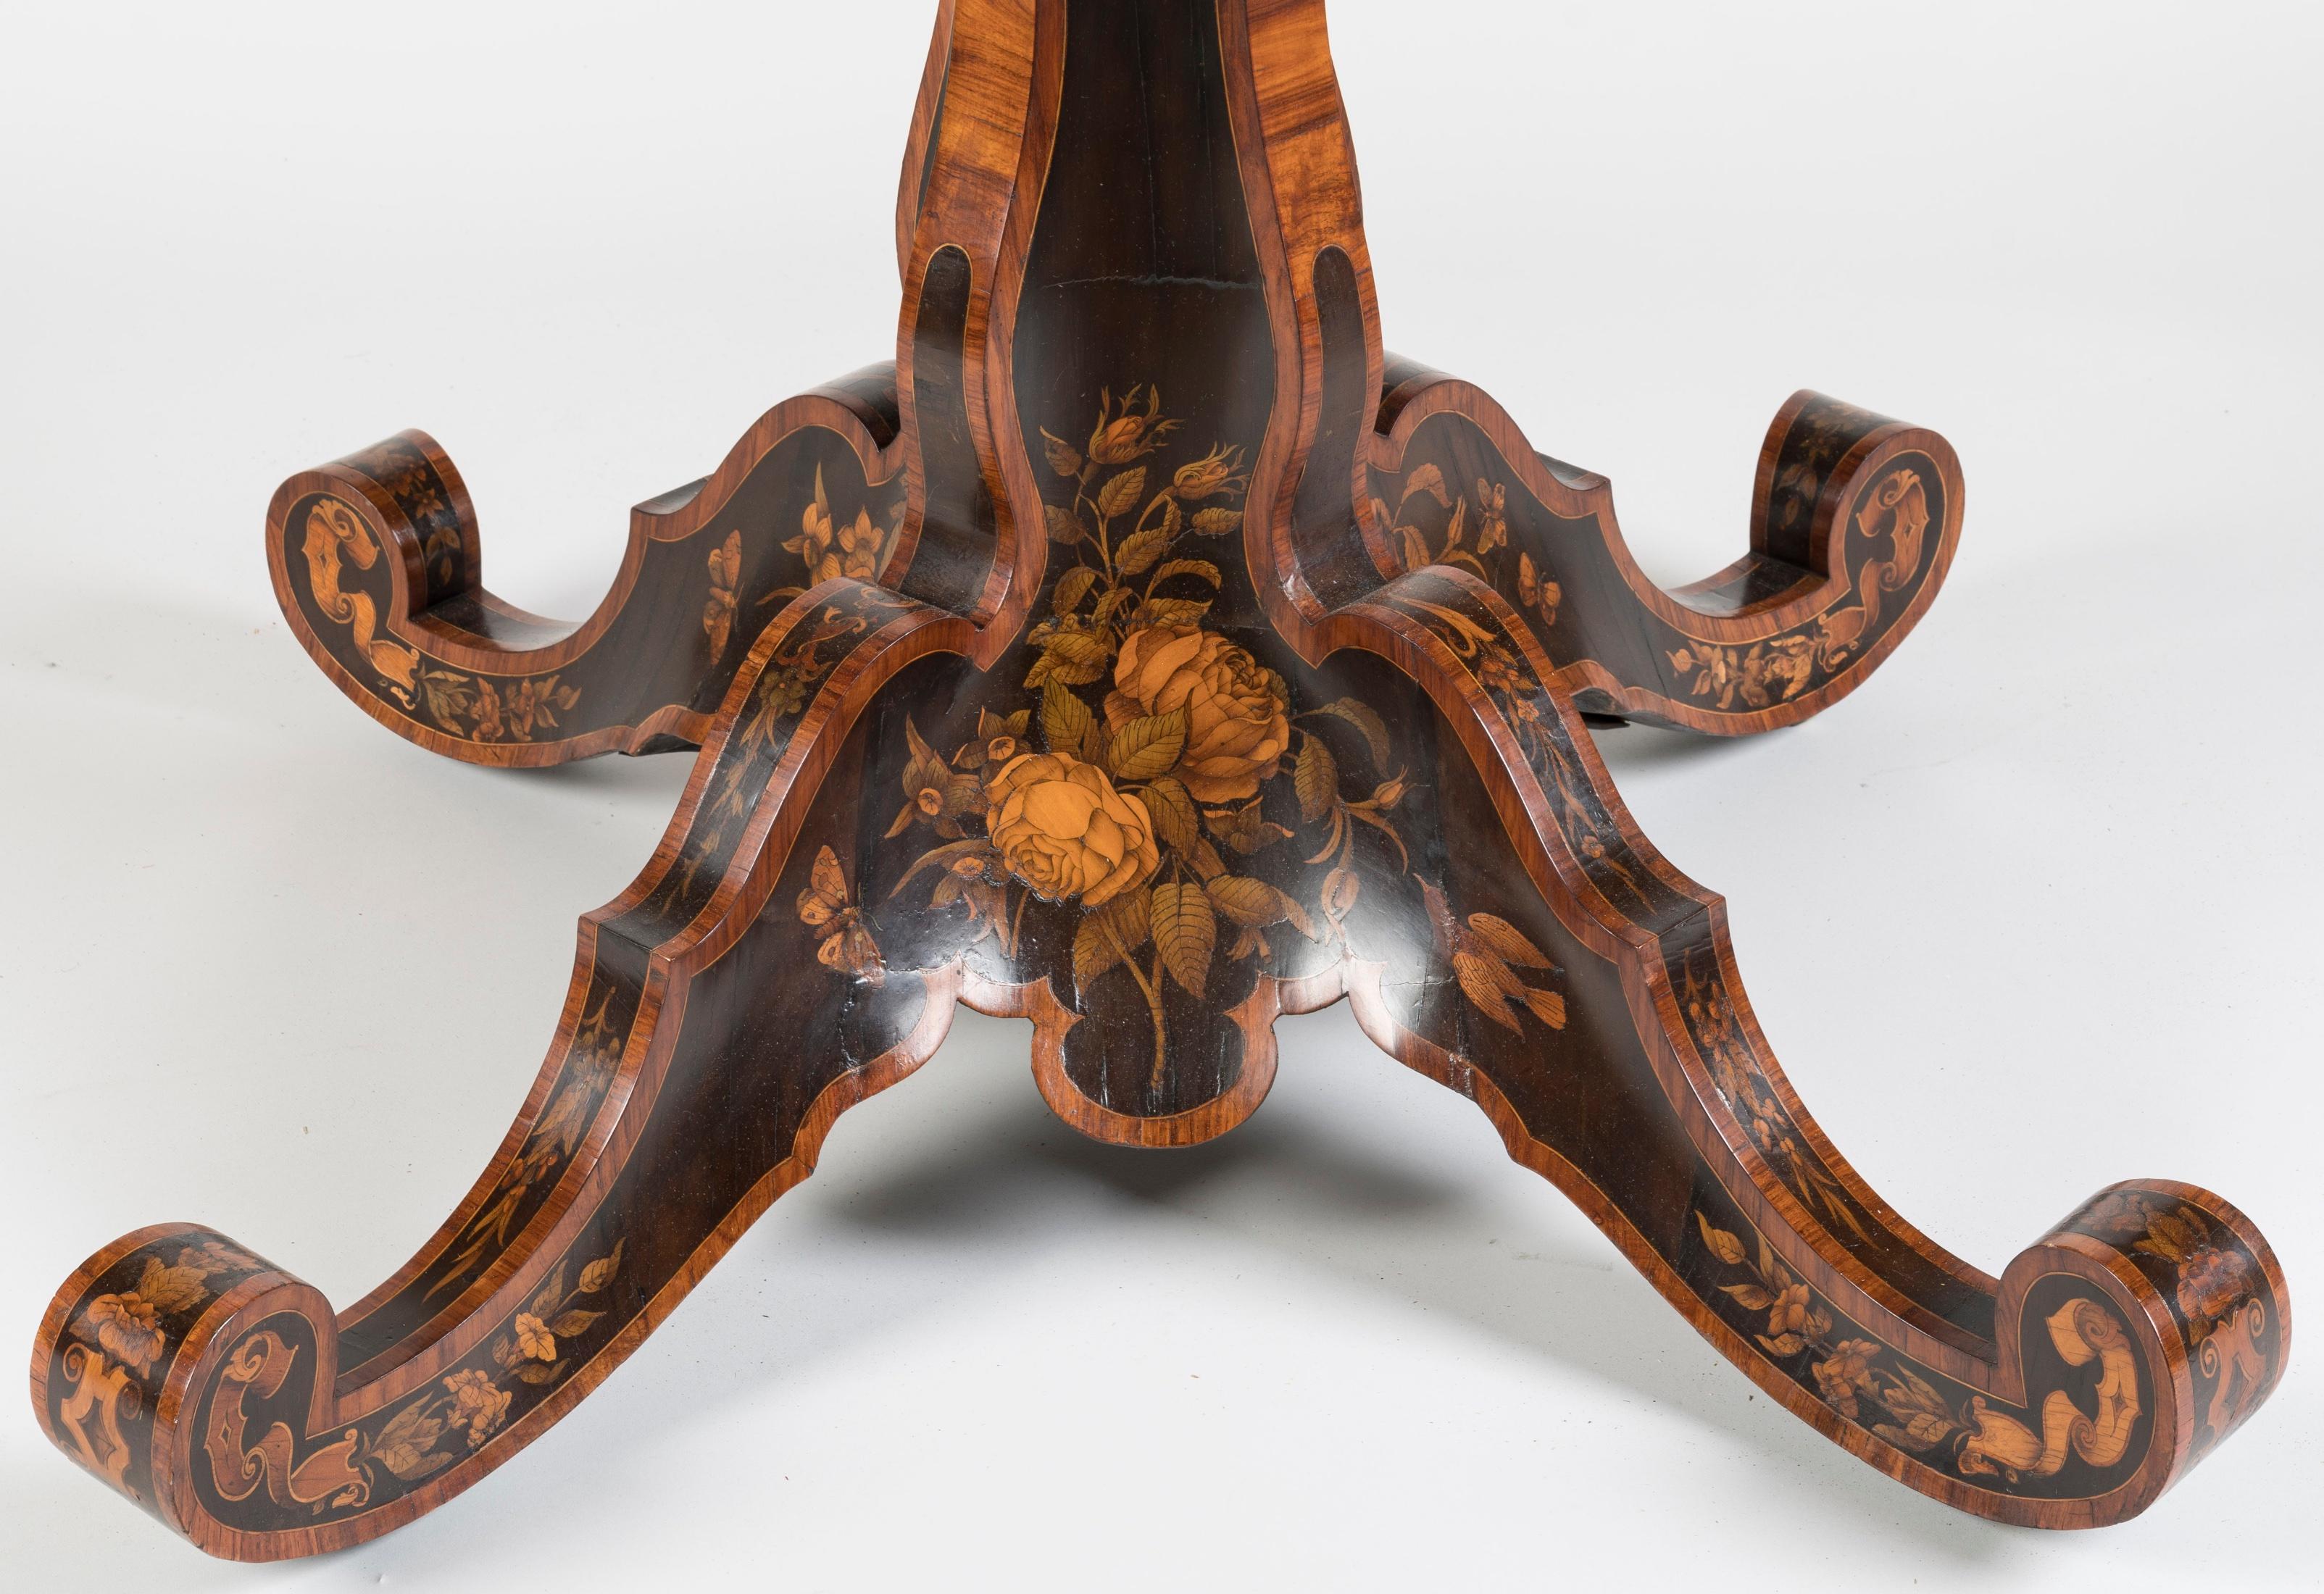 Exquisite 19th Century Burl Walnut and Marquetry Centre Table For Sale 2